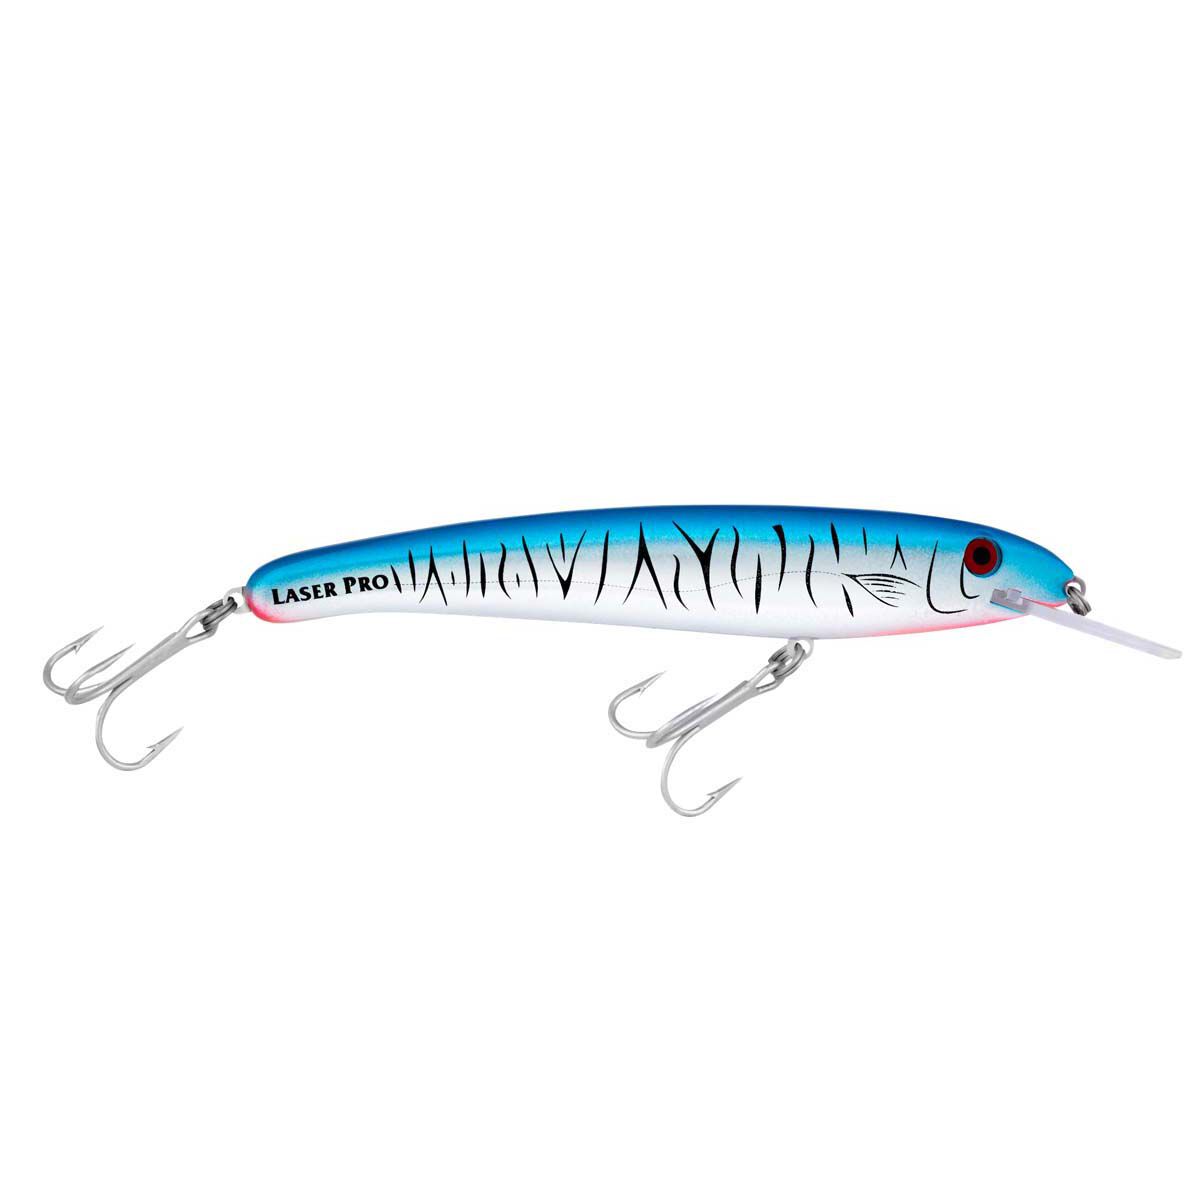 360 Best Old Fishing Lures ideas